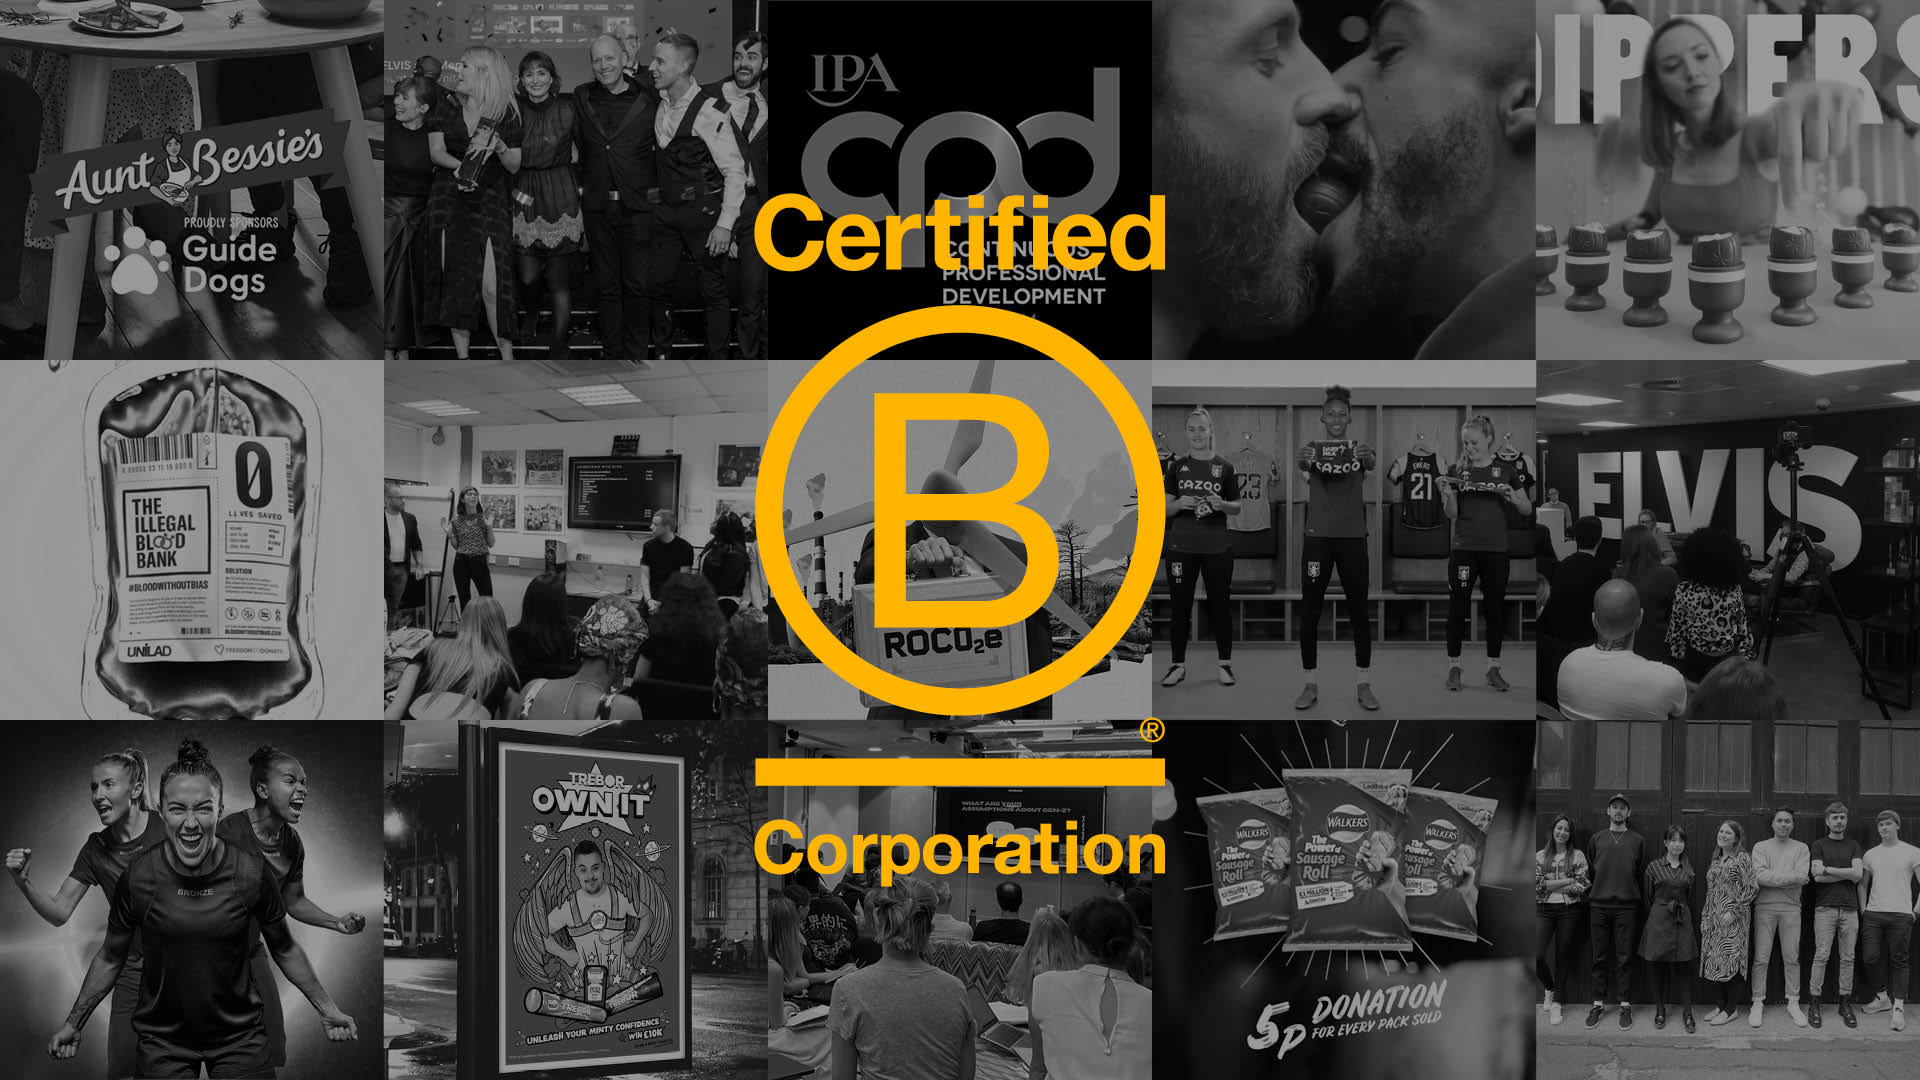 elvis achieves B Corp certification and calls on other agencies to start the process now